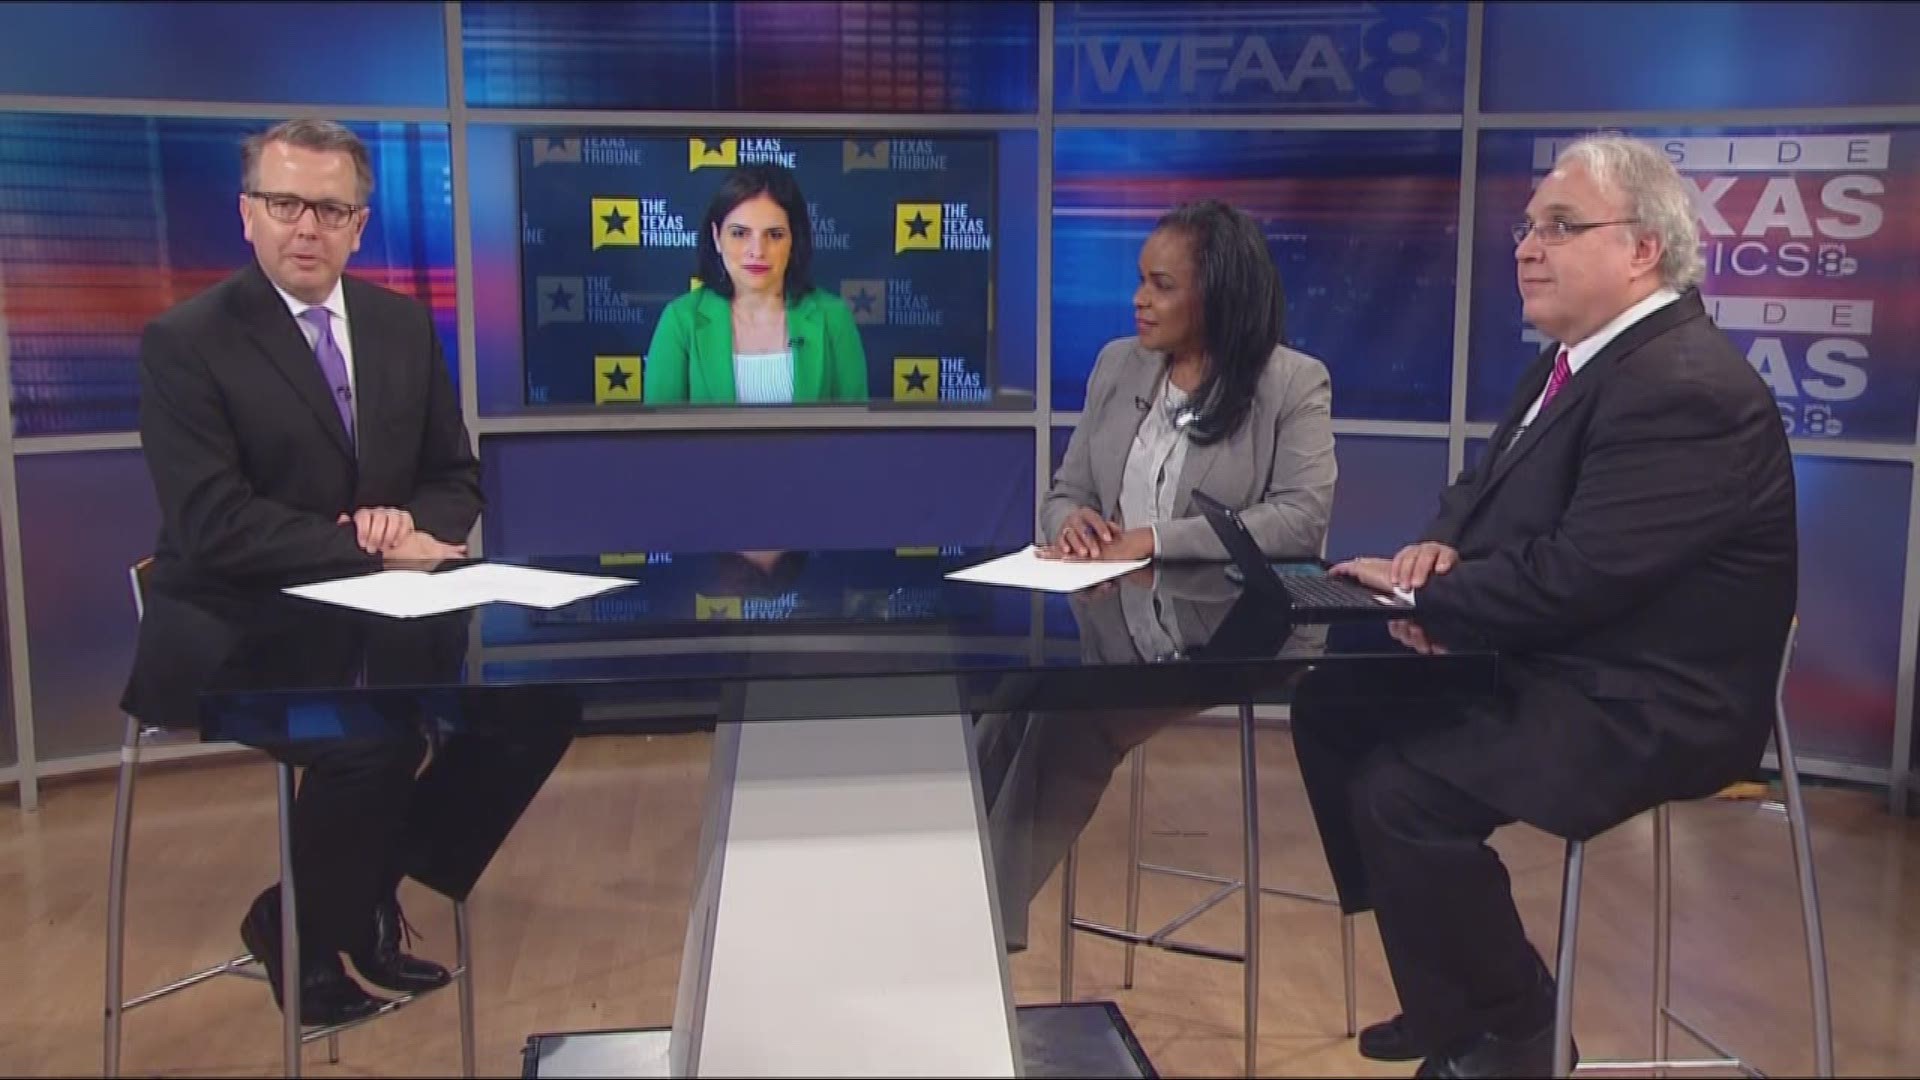 Reporters Roundtable puts the headlines in perspective each week. Host Jason, Bud and Alana returned along with Berna Dean Steptoe, WFAA's political producer.